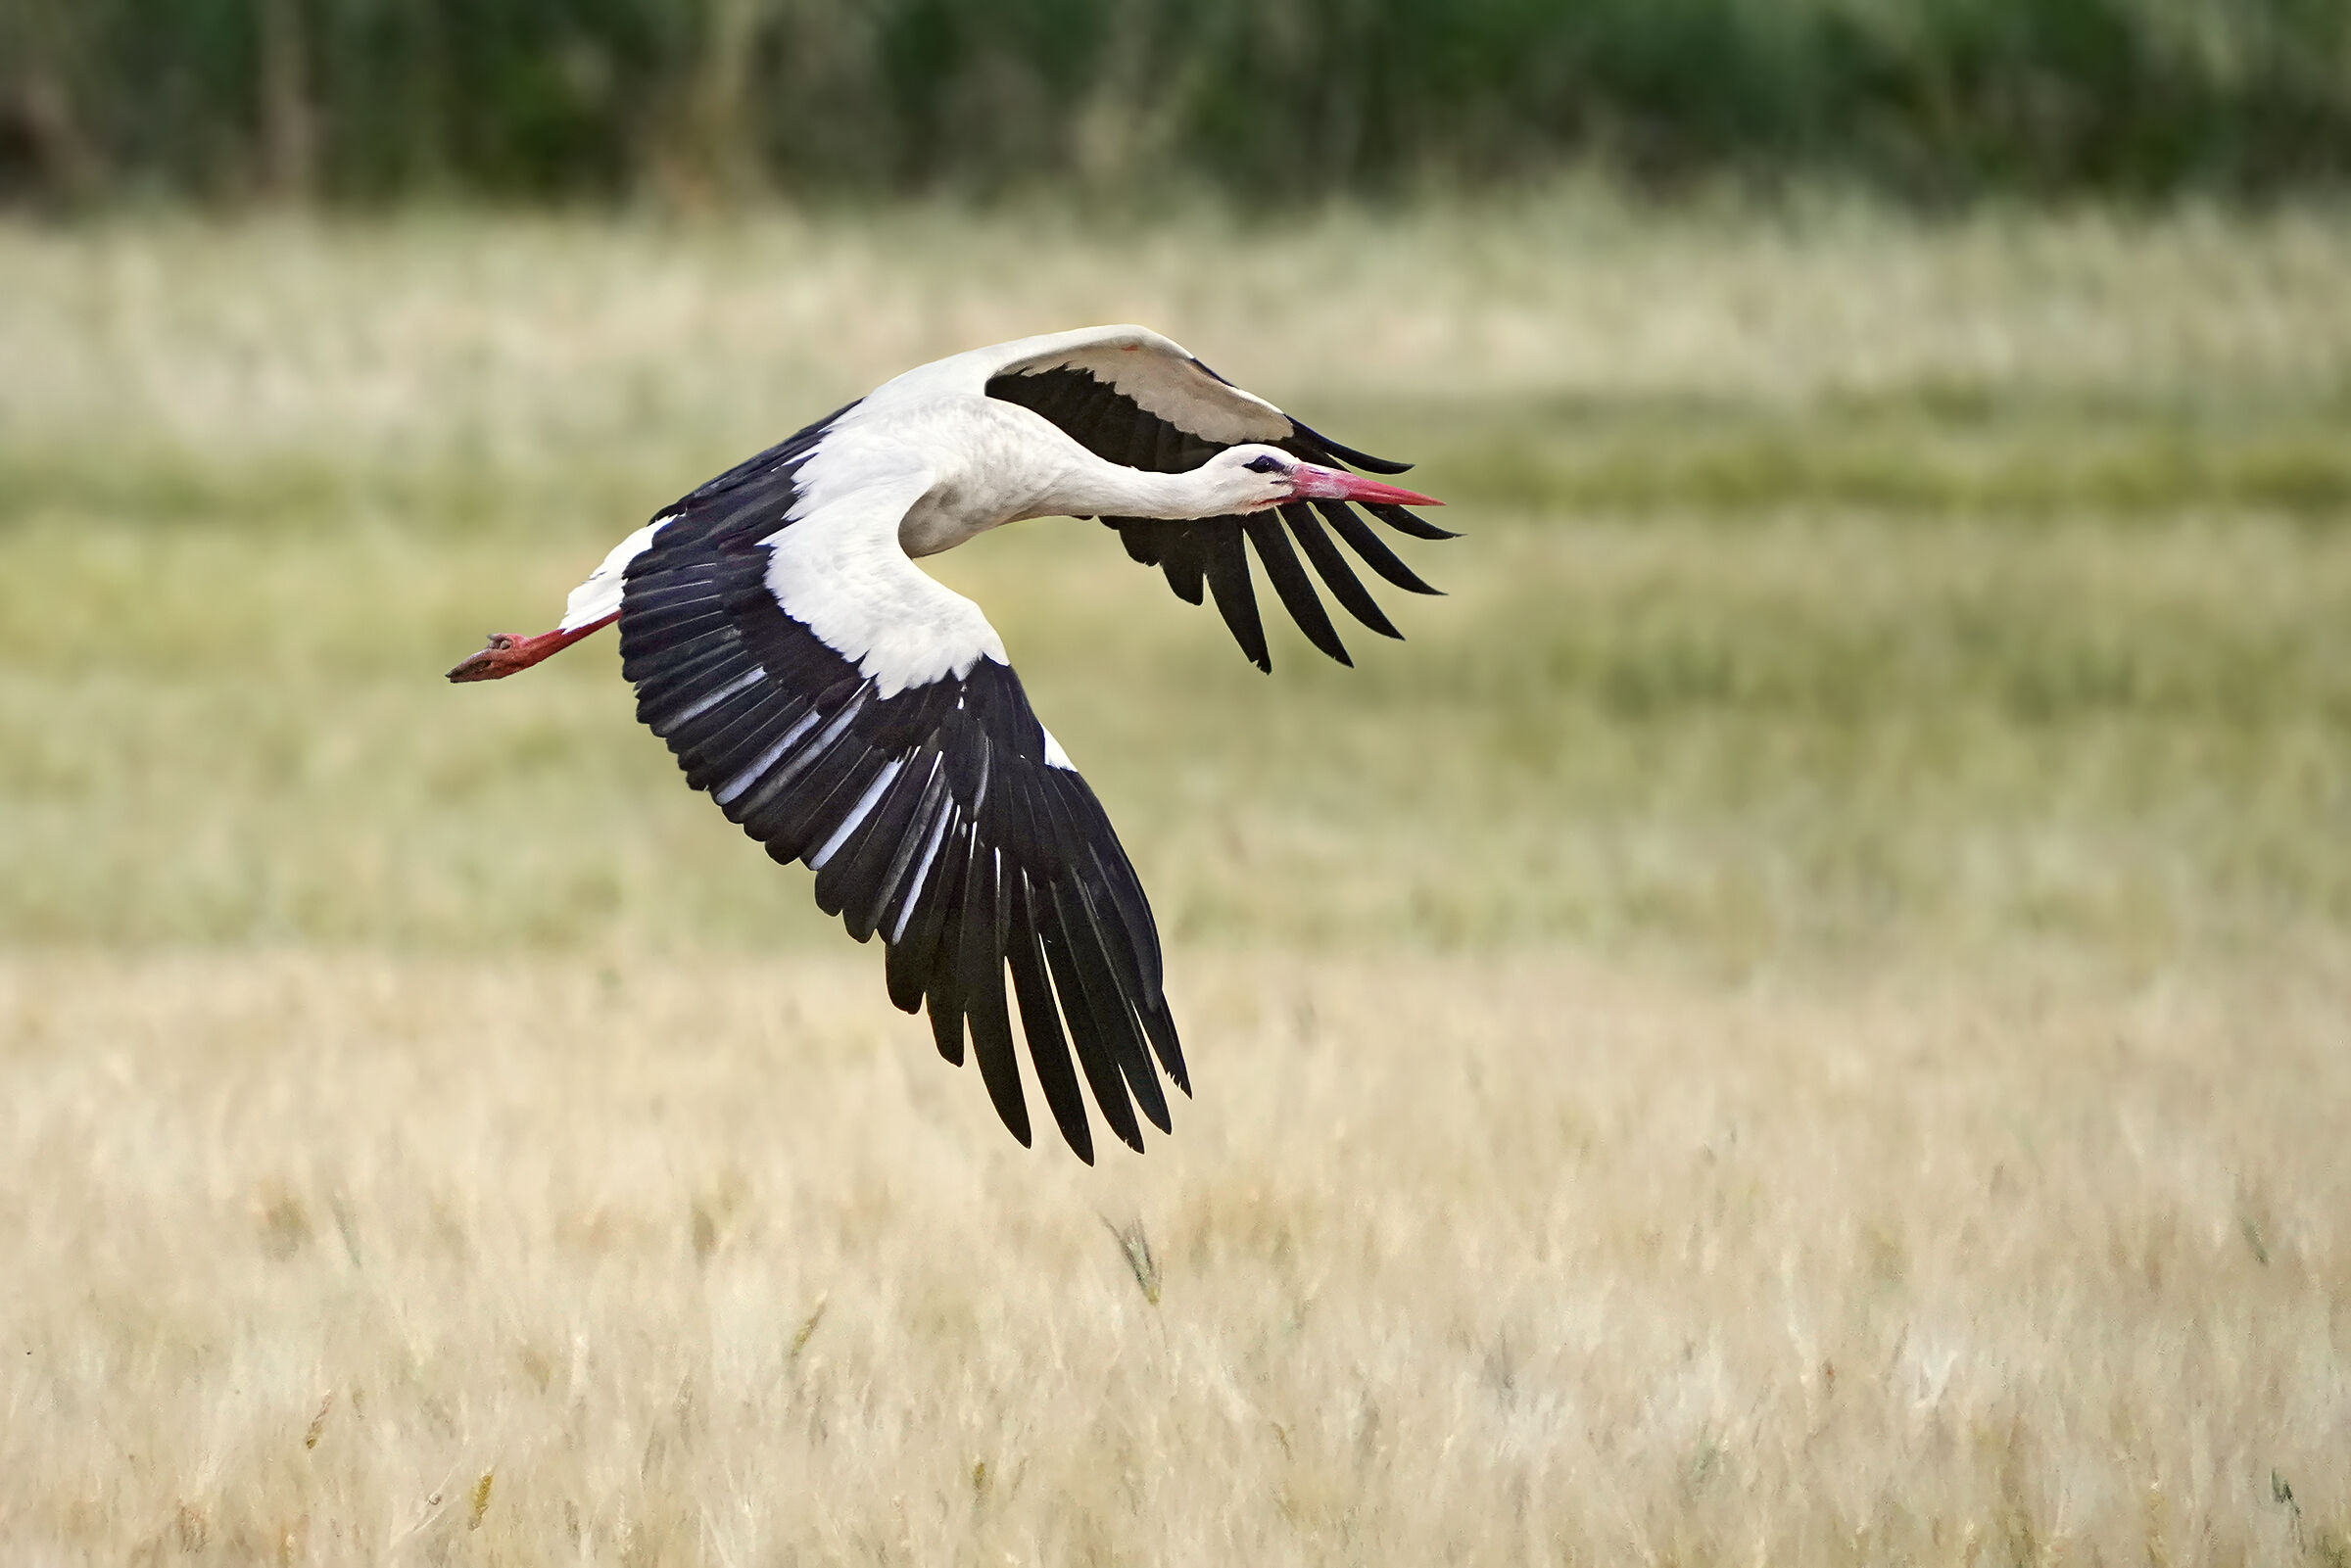 Stork and wheat...